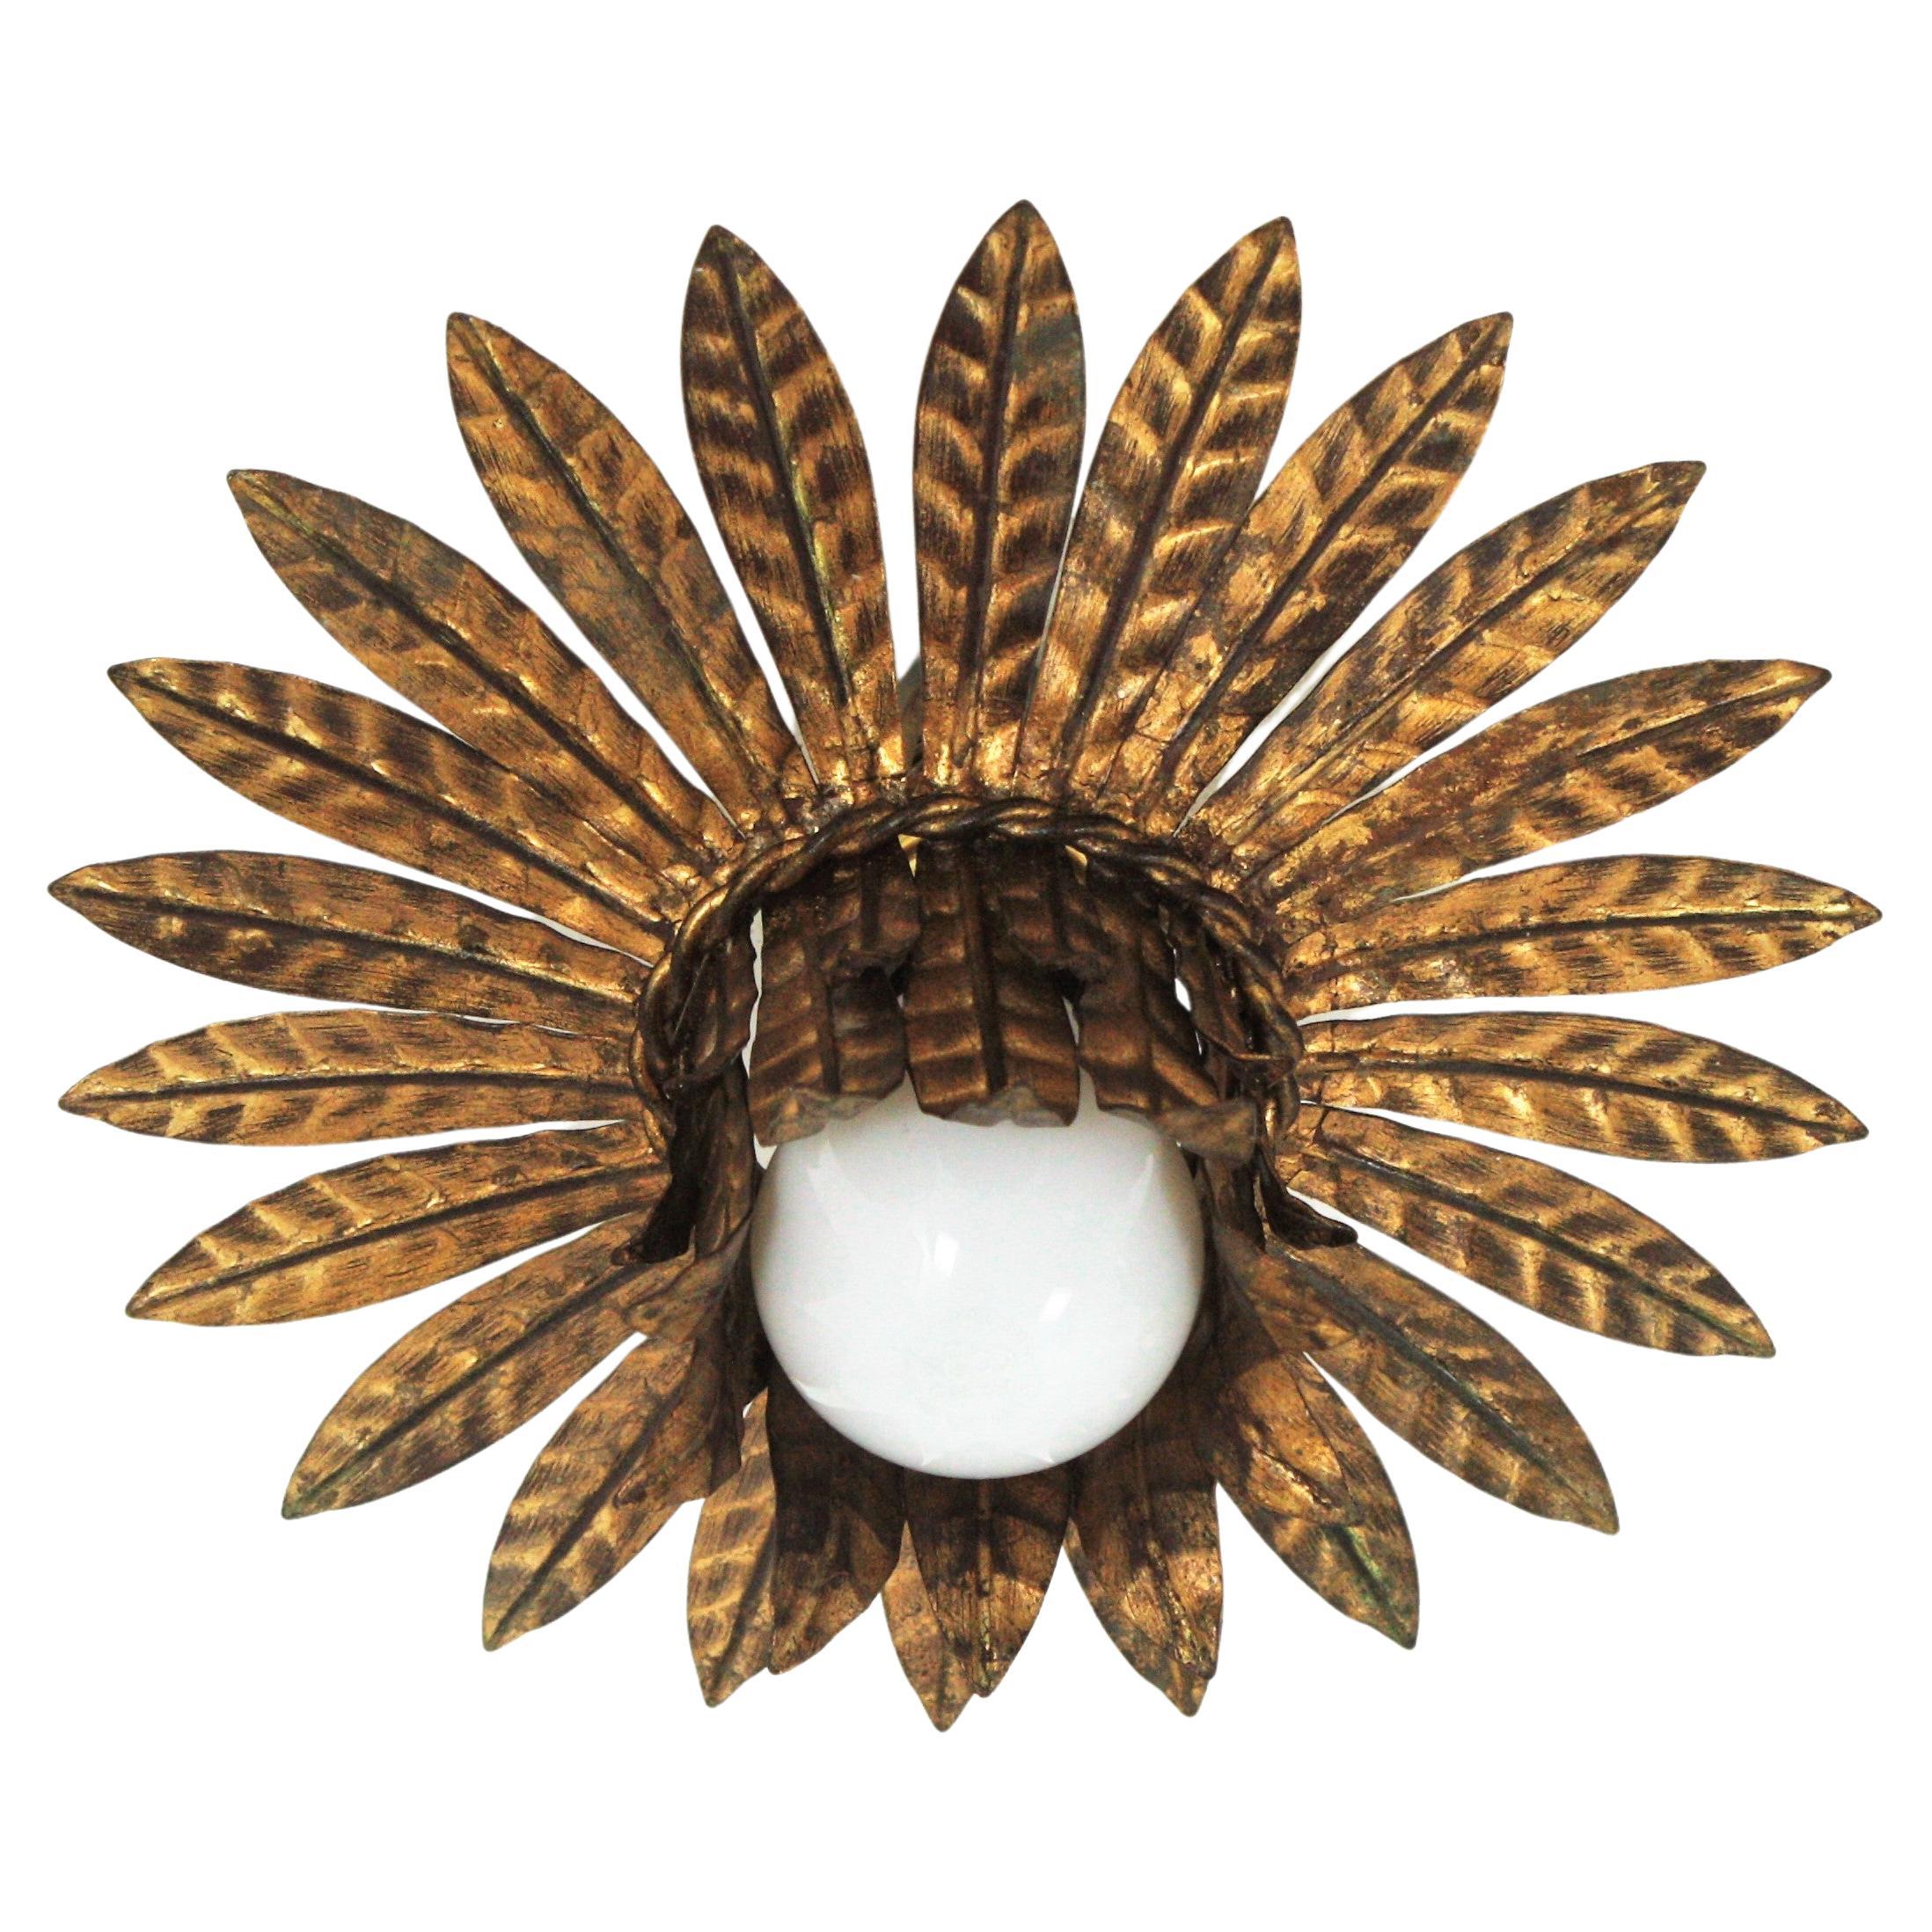 French Leaves Bouquet Crown Ceiling Light Fixture in Gilt Iron, 1940s